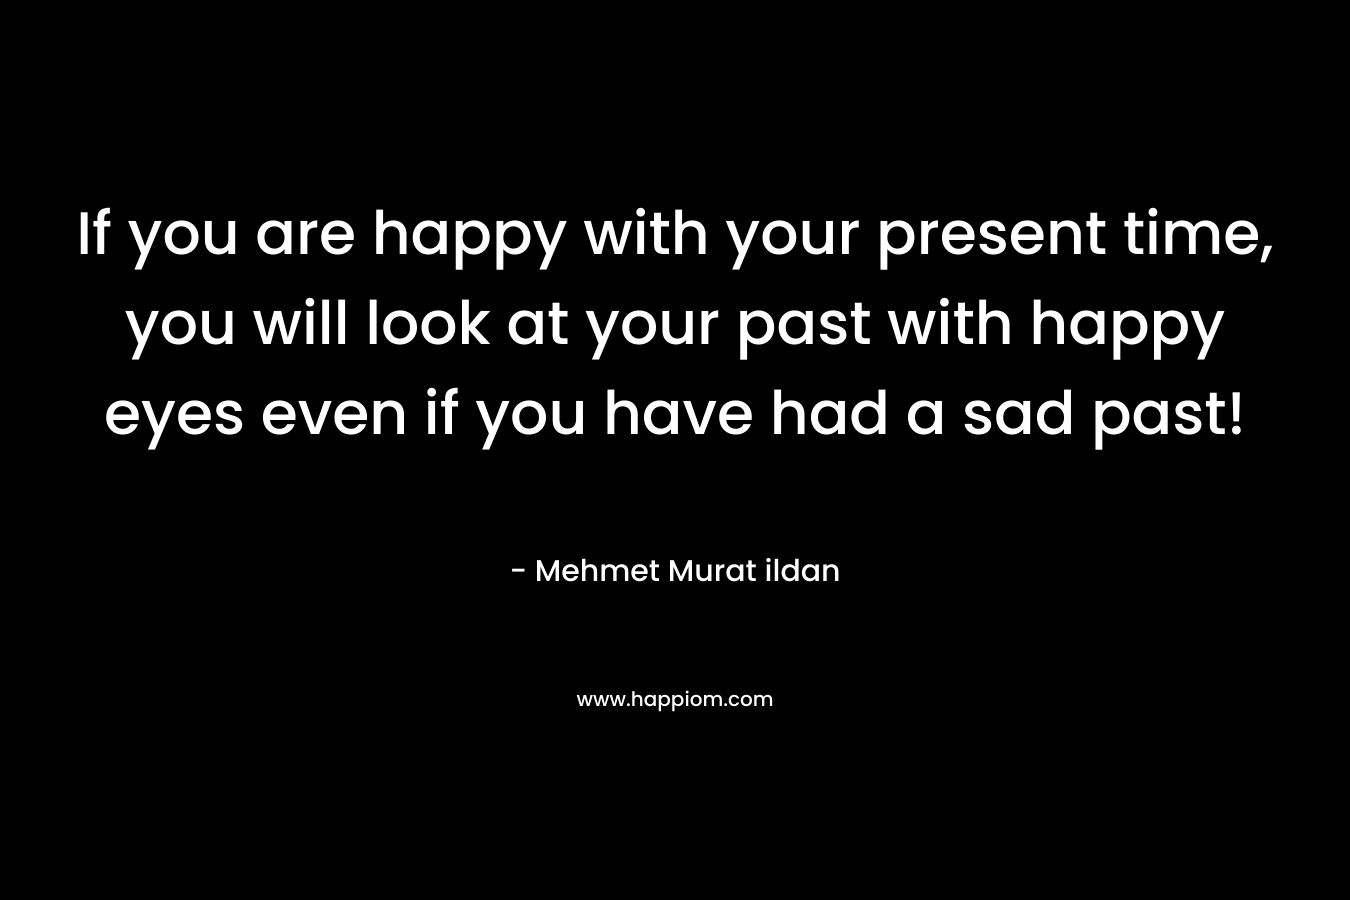 If you are happy with your present time, you will look at your past with happy eyes even if you have had a sad past!